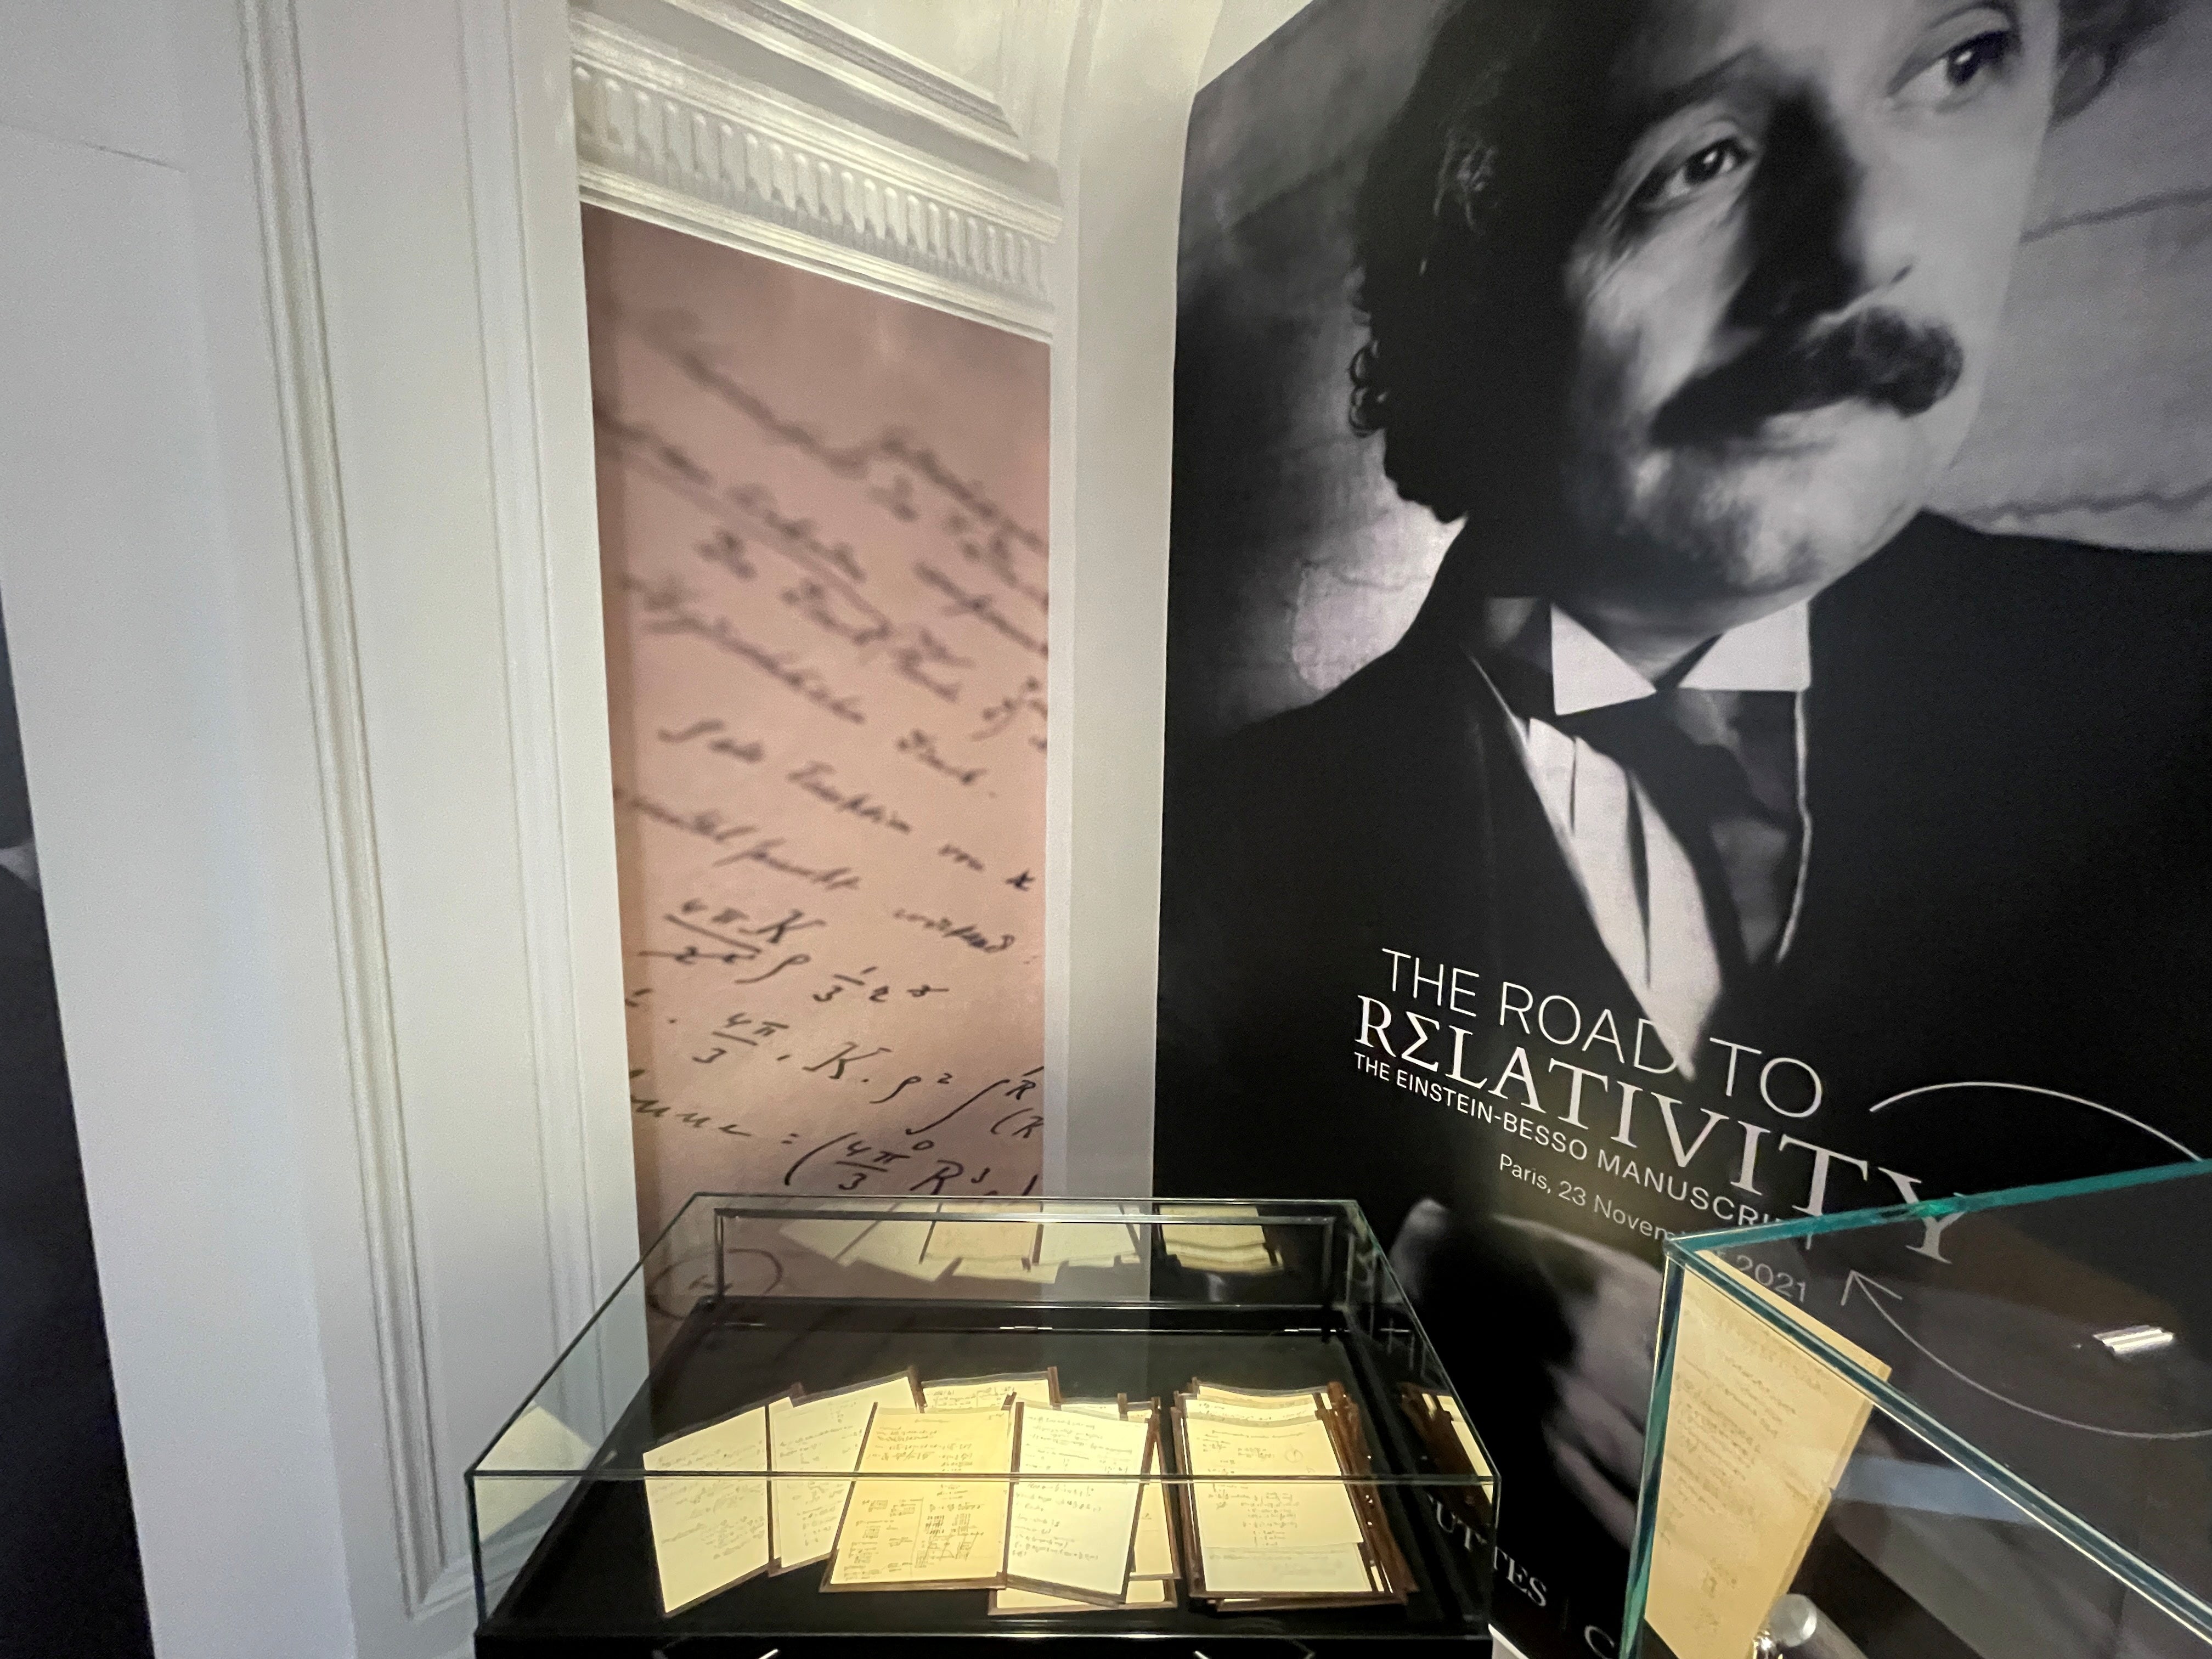 Einstein’s handwritten notes on the theory of relativity sold for record £9.7million at an auction in Paris